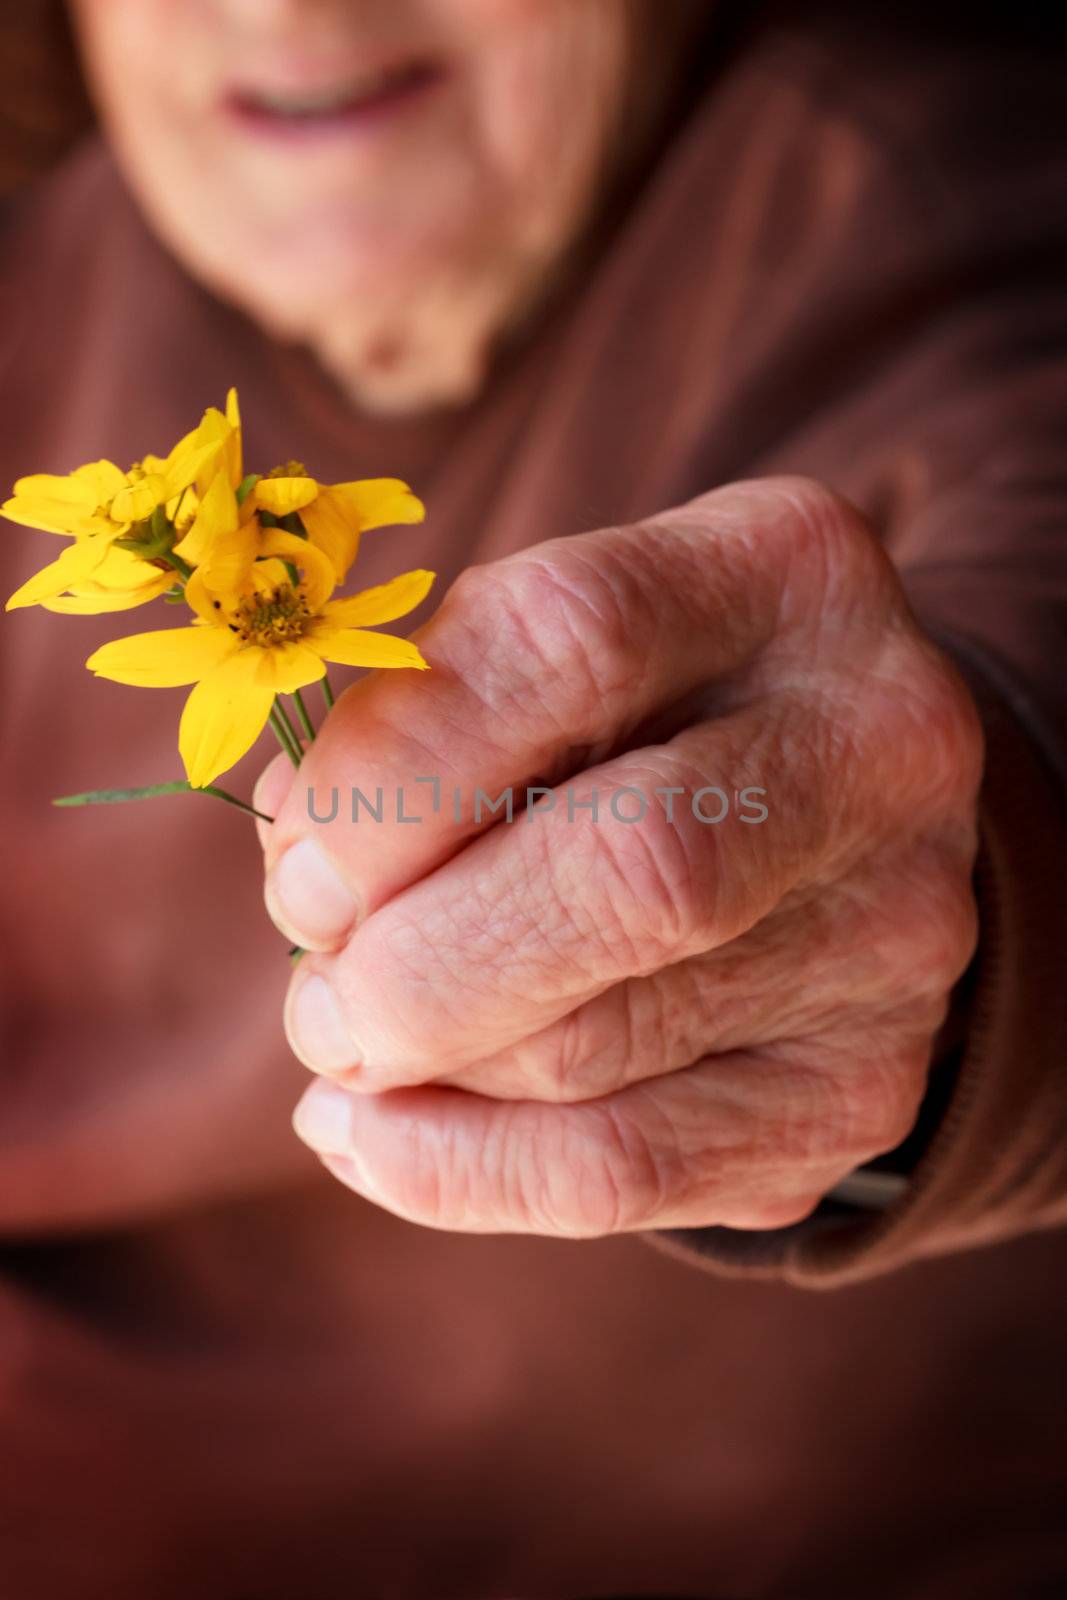 Senior lady holding or offering a yellow flower